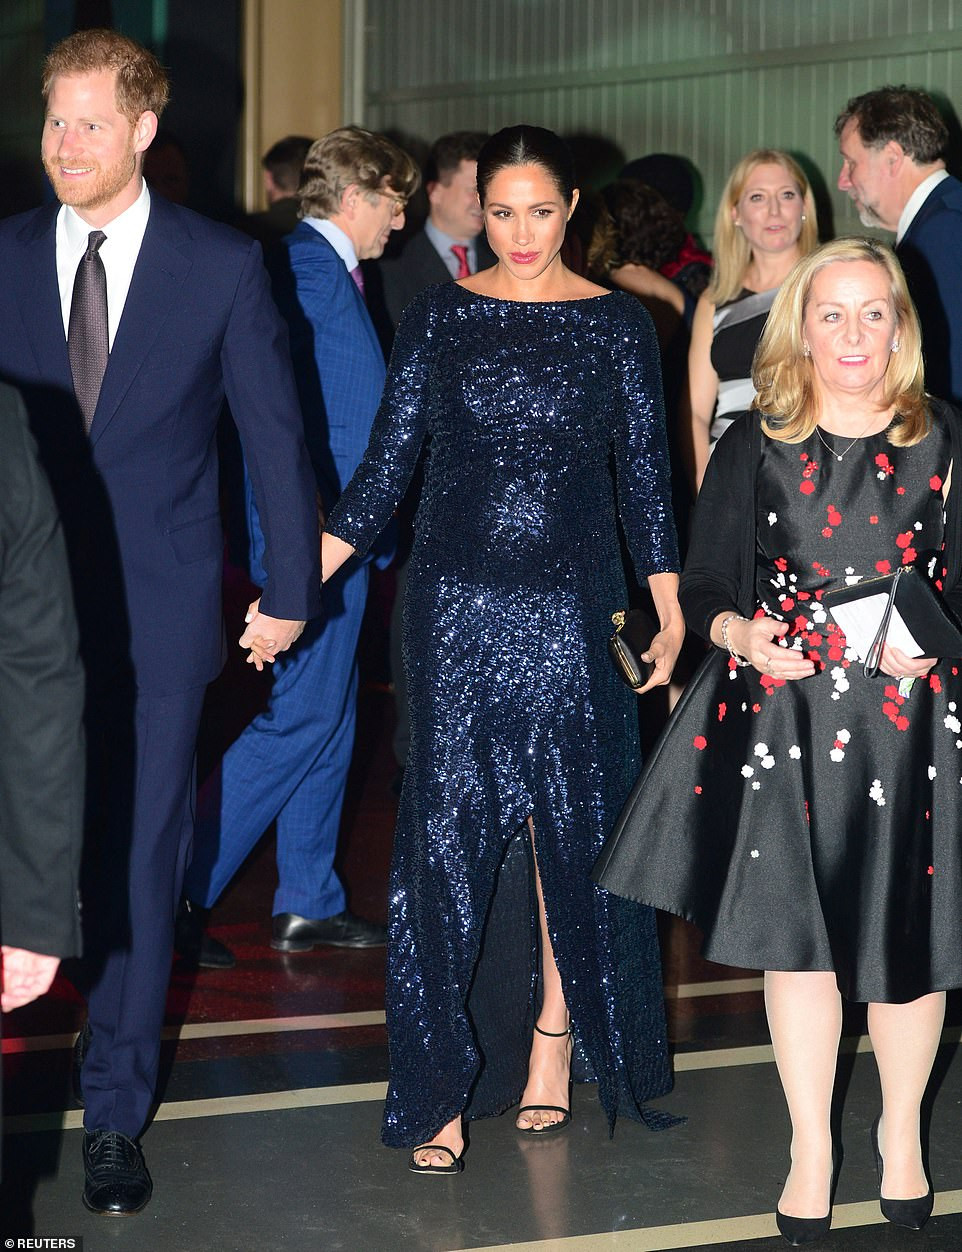 Meghan Markle Sparkles In Black At The Royal Albert Hall